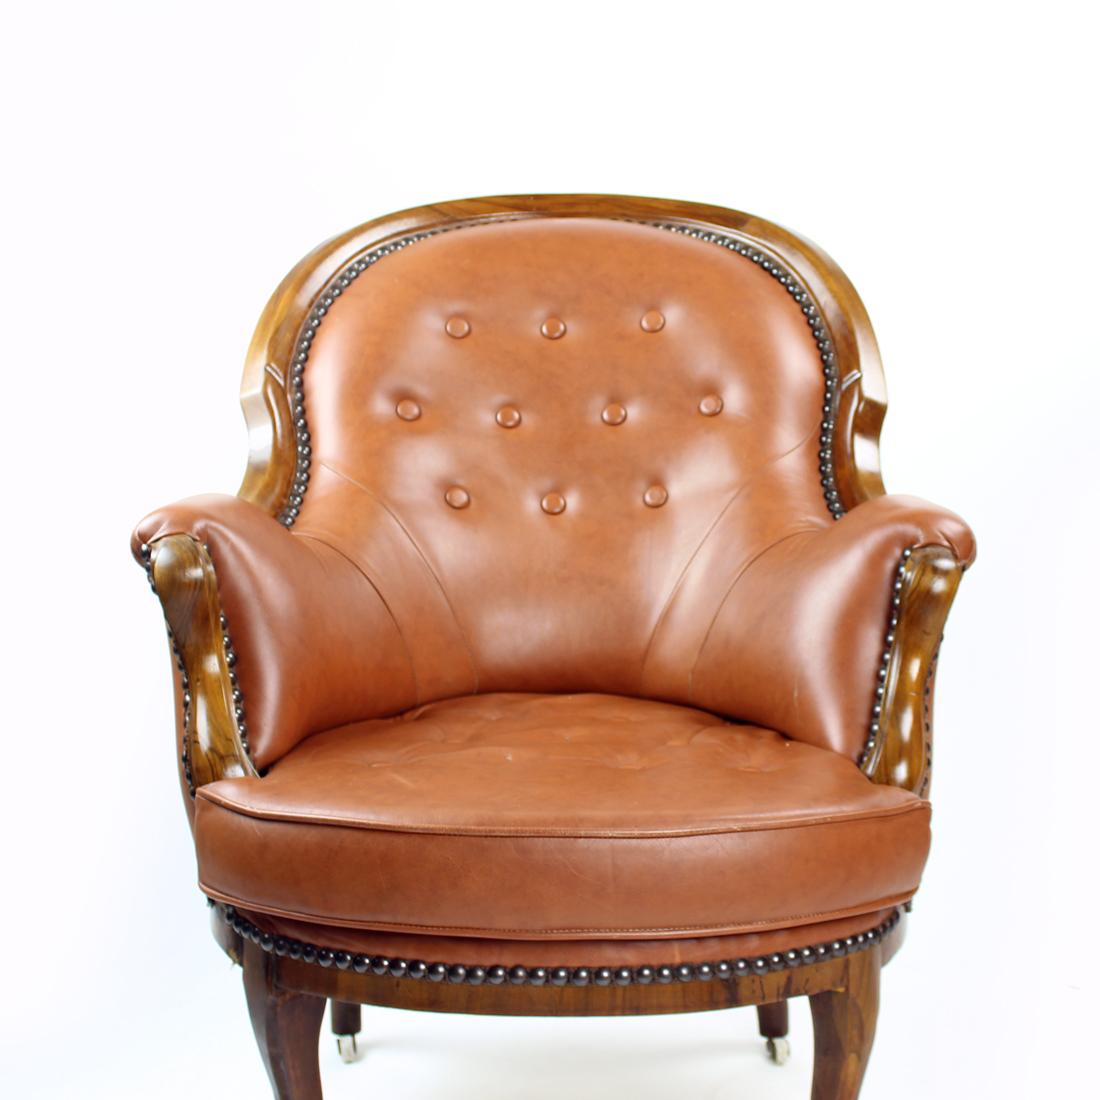 Beautiful armchair with stunning details. The chair was produced in 1950s in Czechoslovakia. The chair is made of walnut wooden structure and faux leather sear and backrest. The woodwork is particulary wonderful with amazing details. The seat and